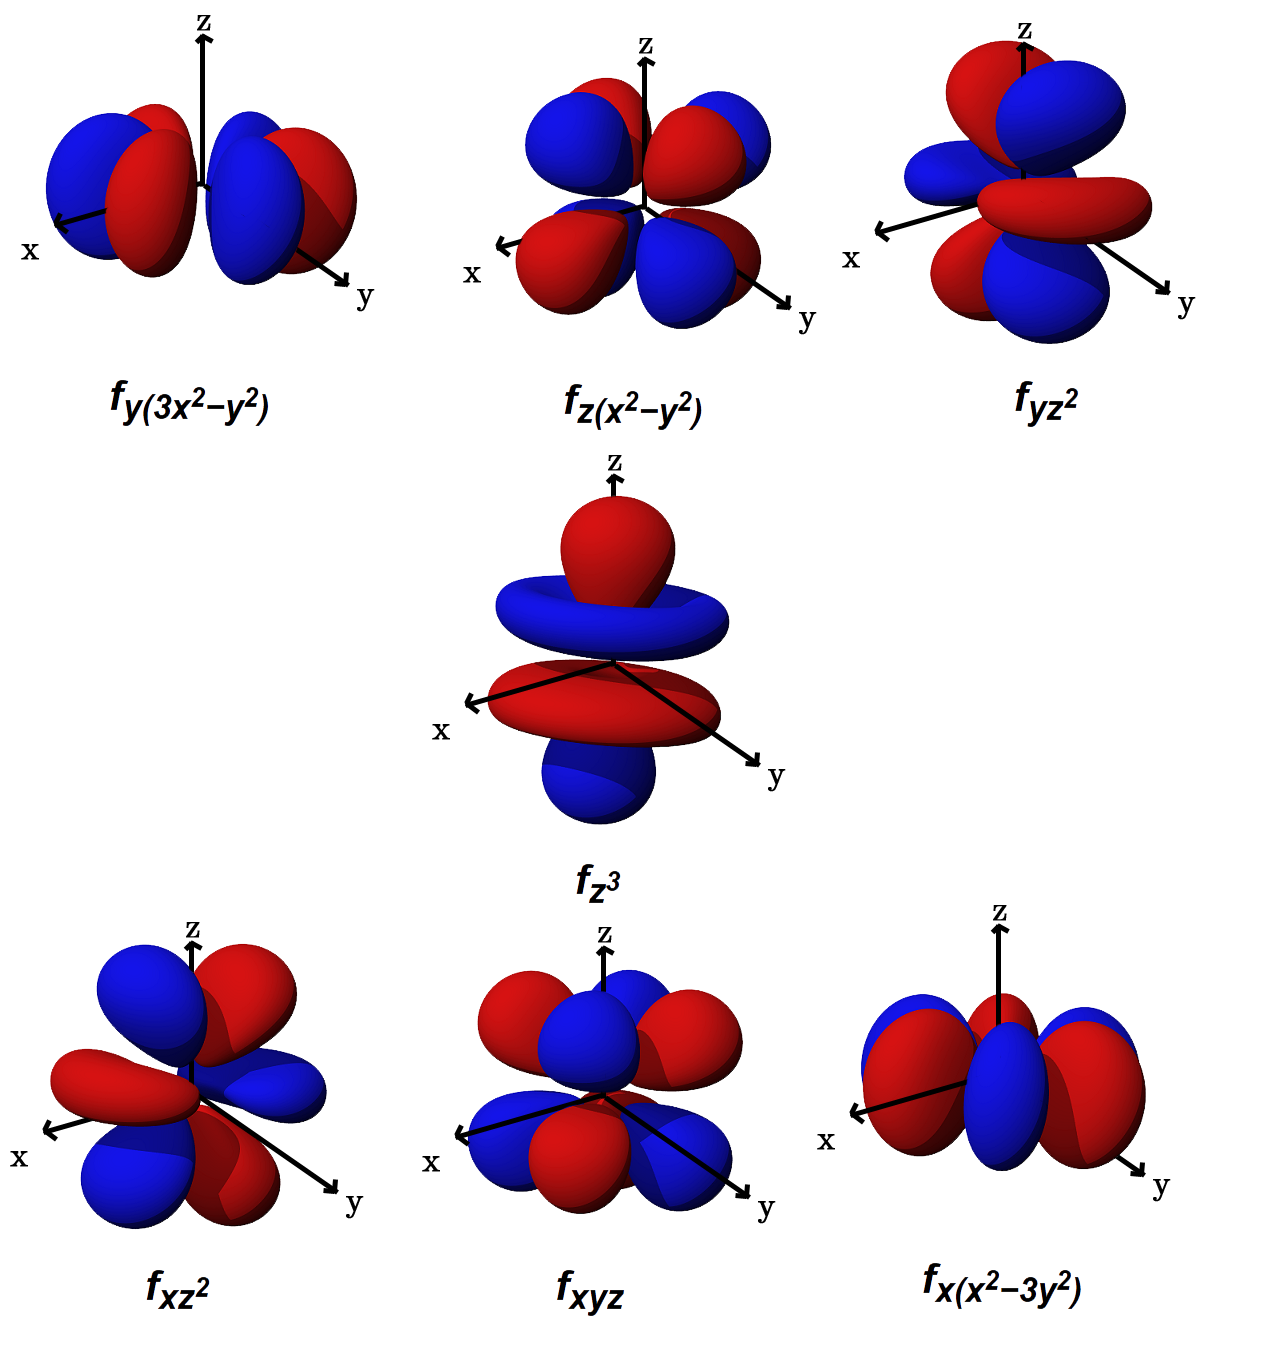 classify these atomic orbitals